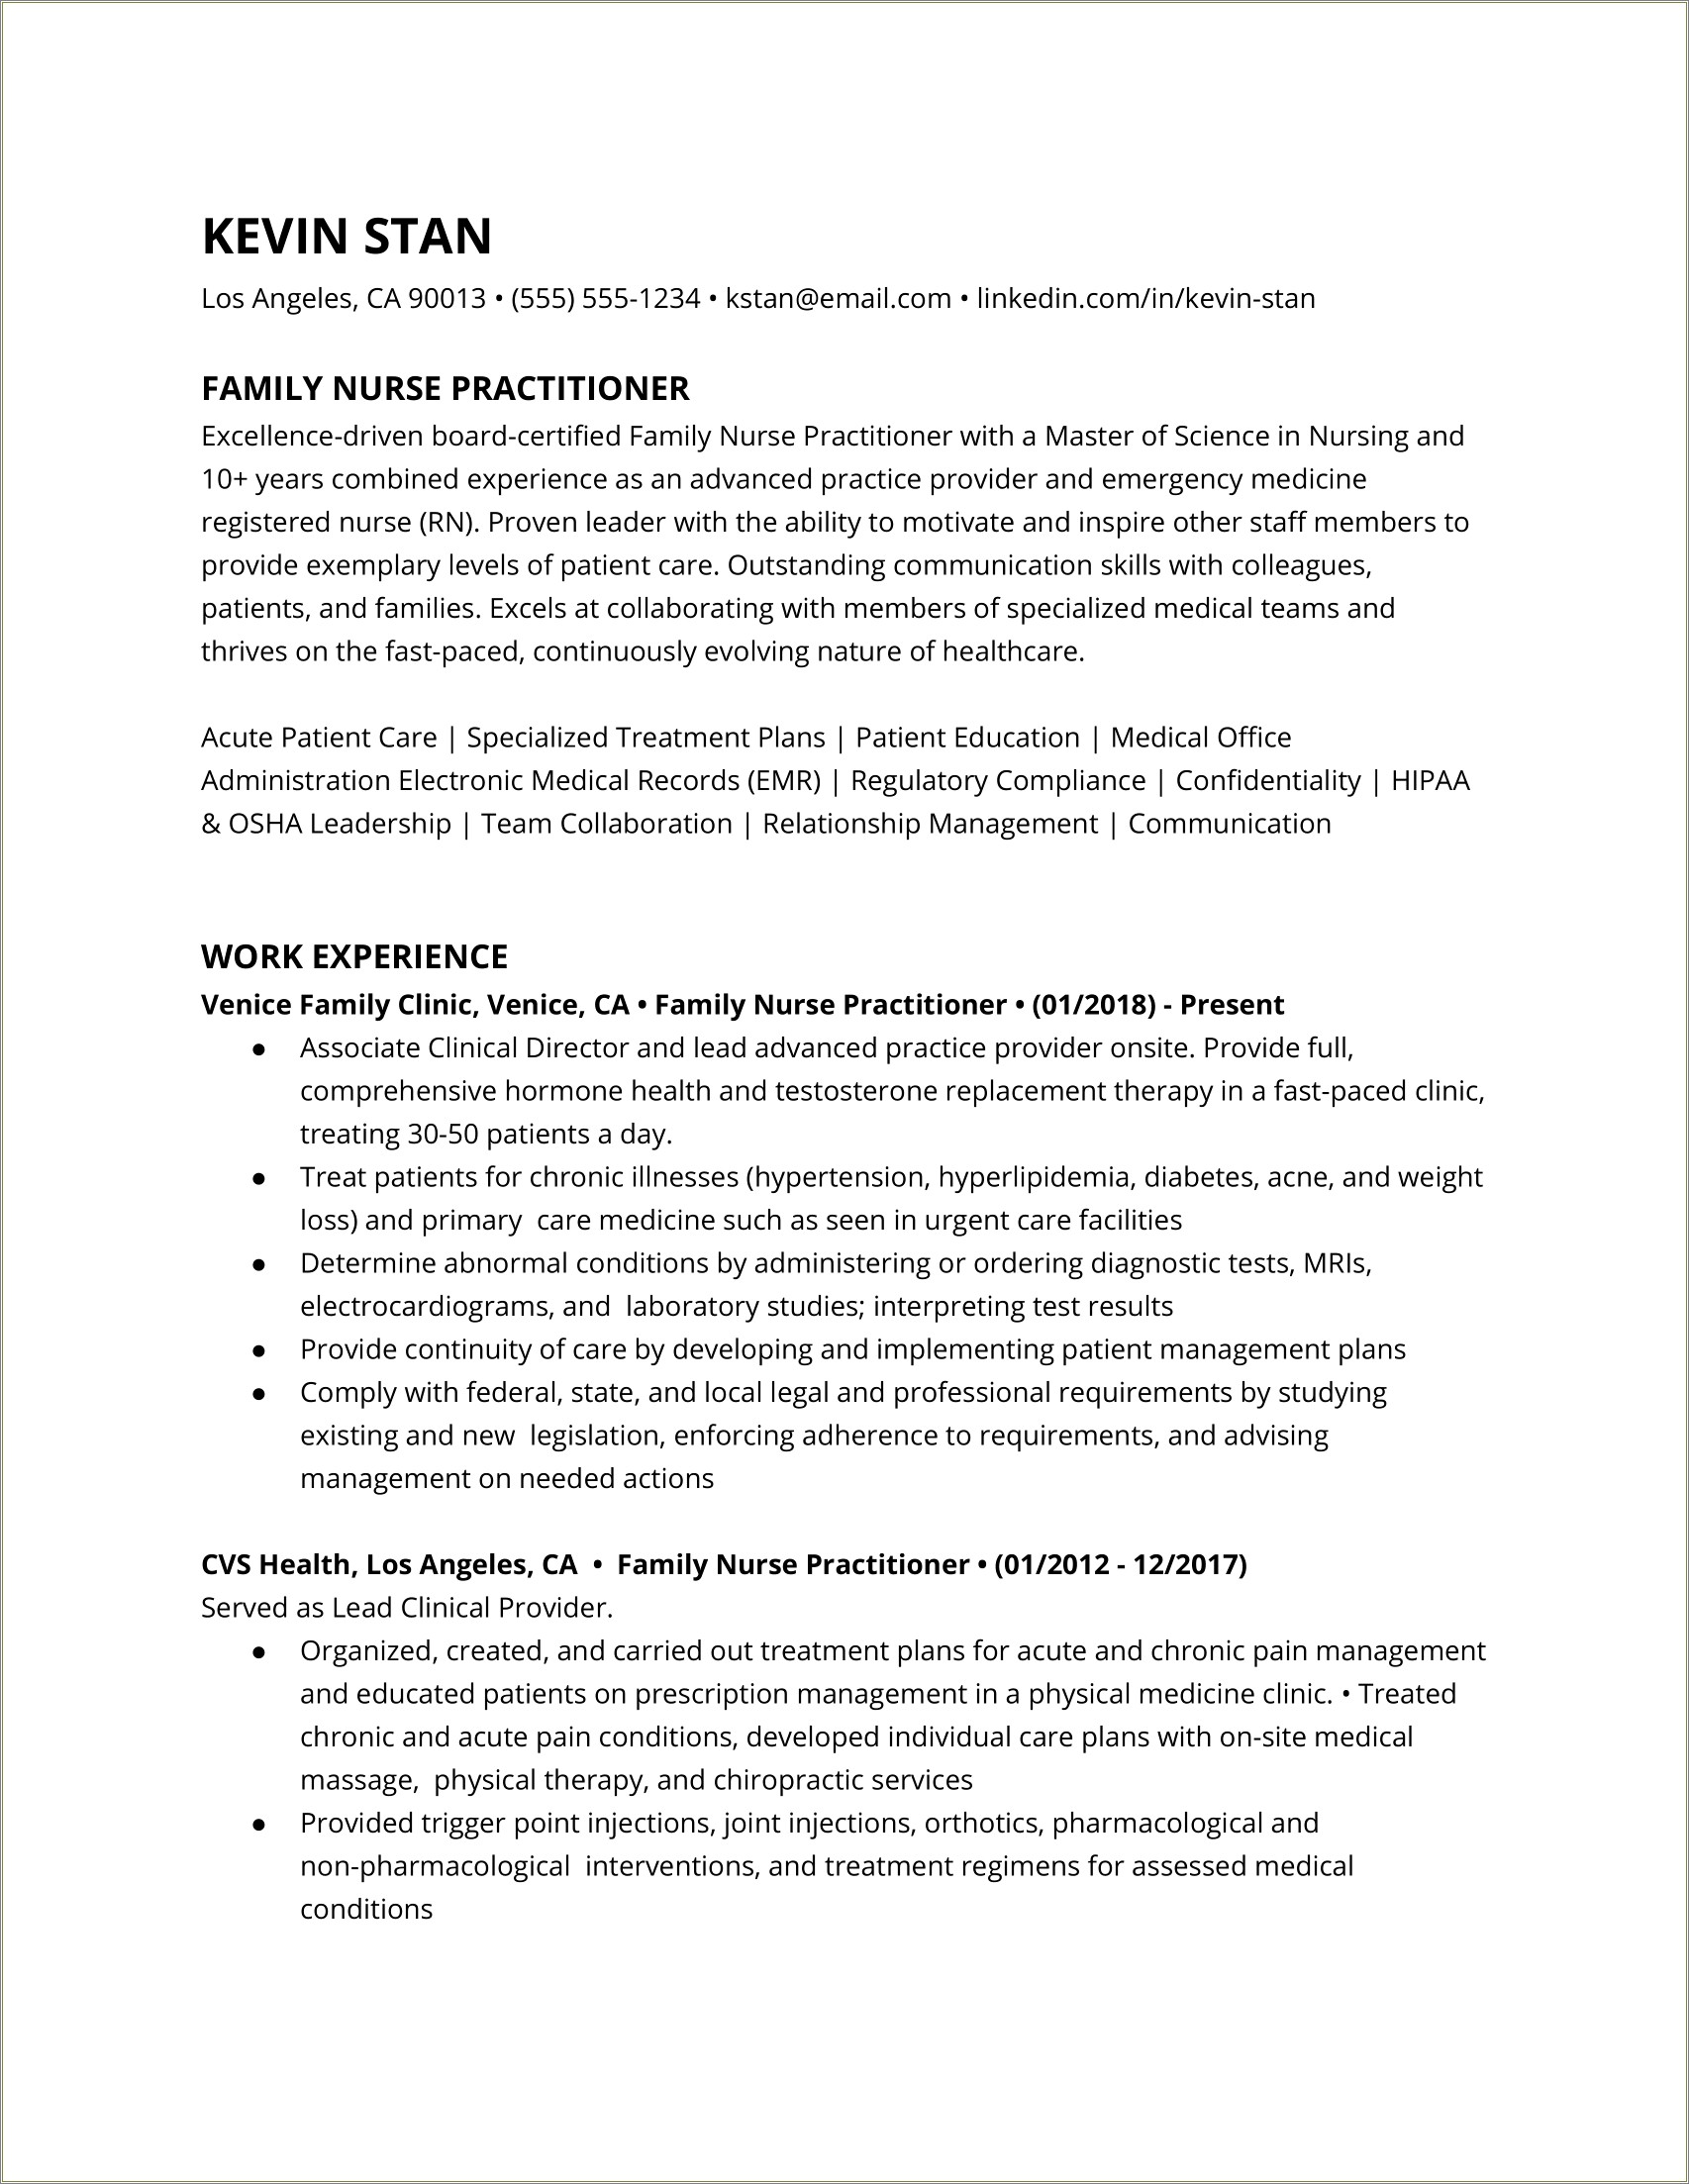 Example Resume For A Nurse Practitioner